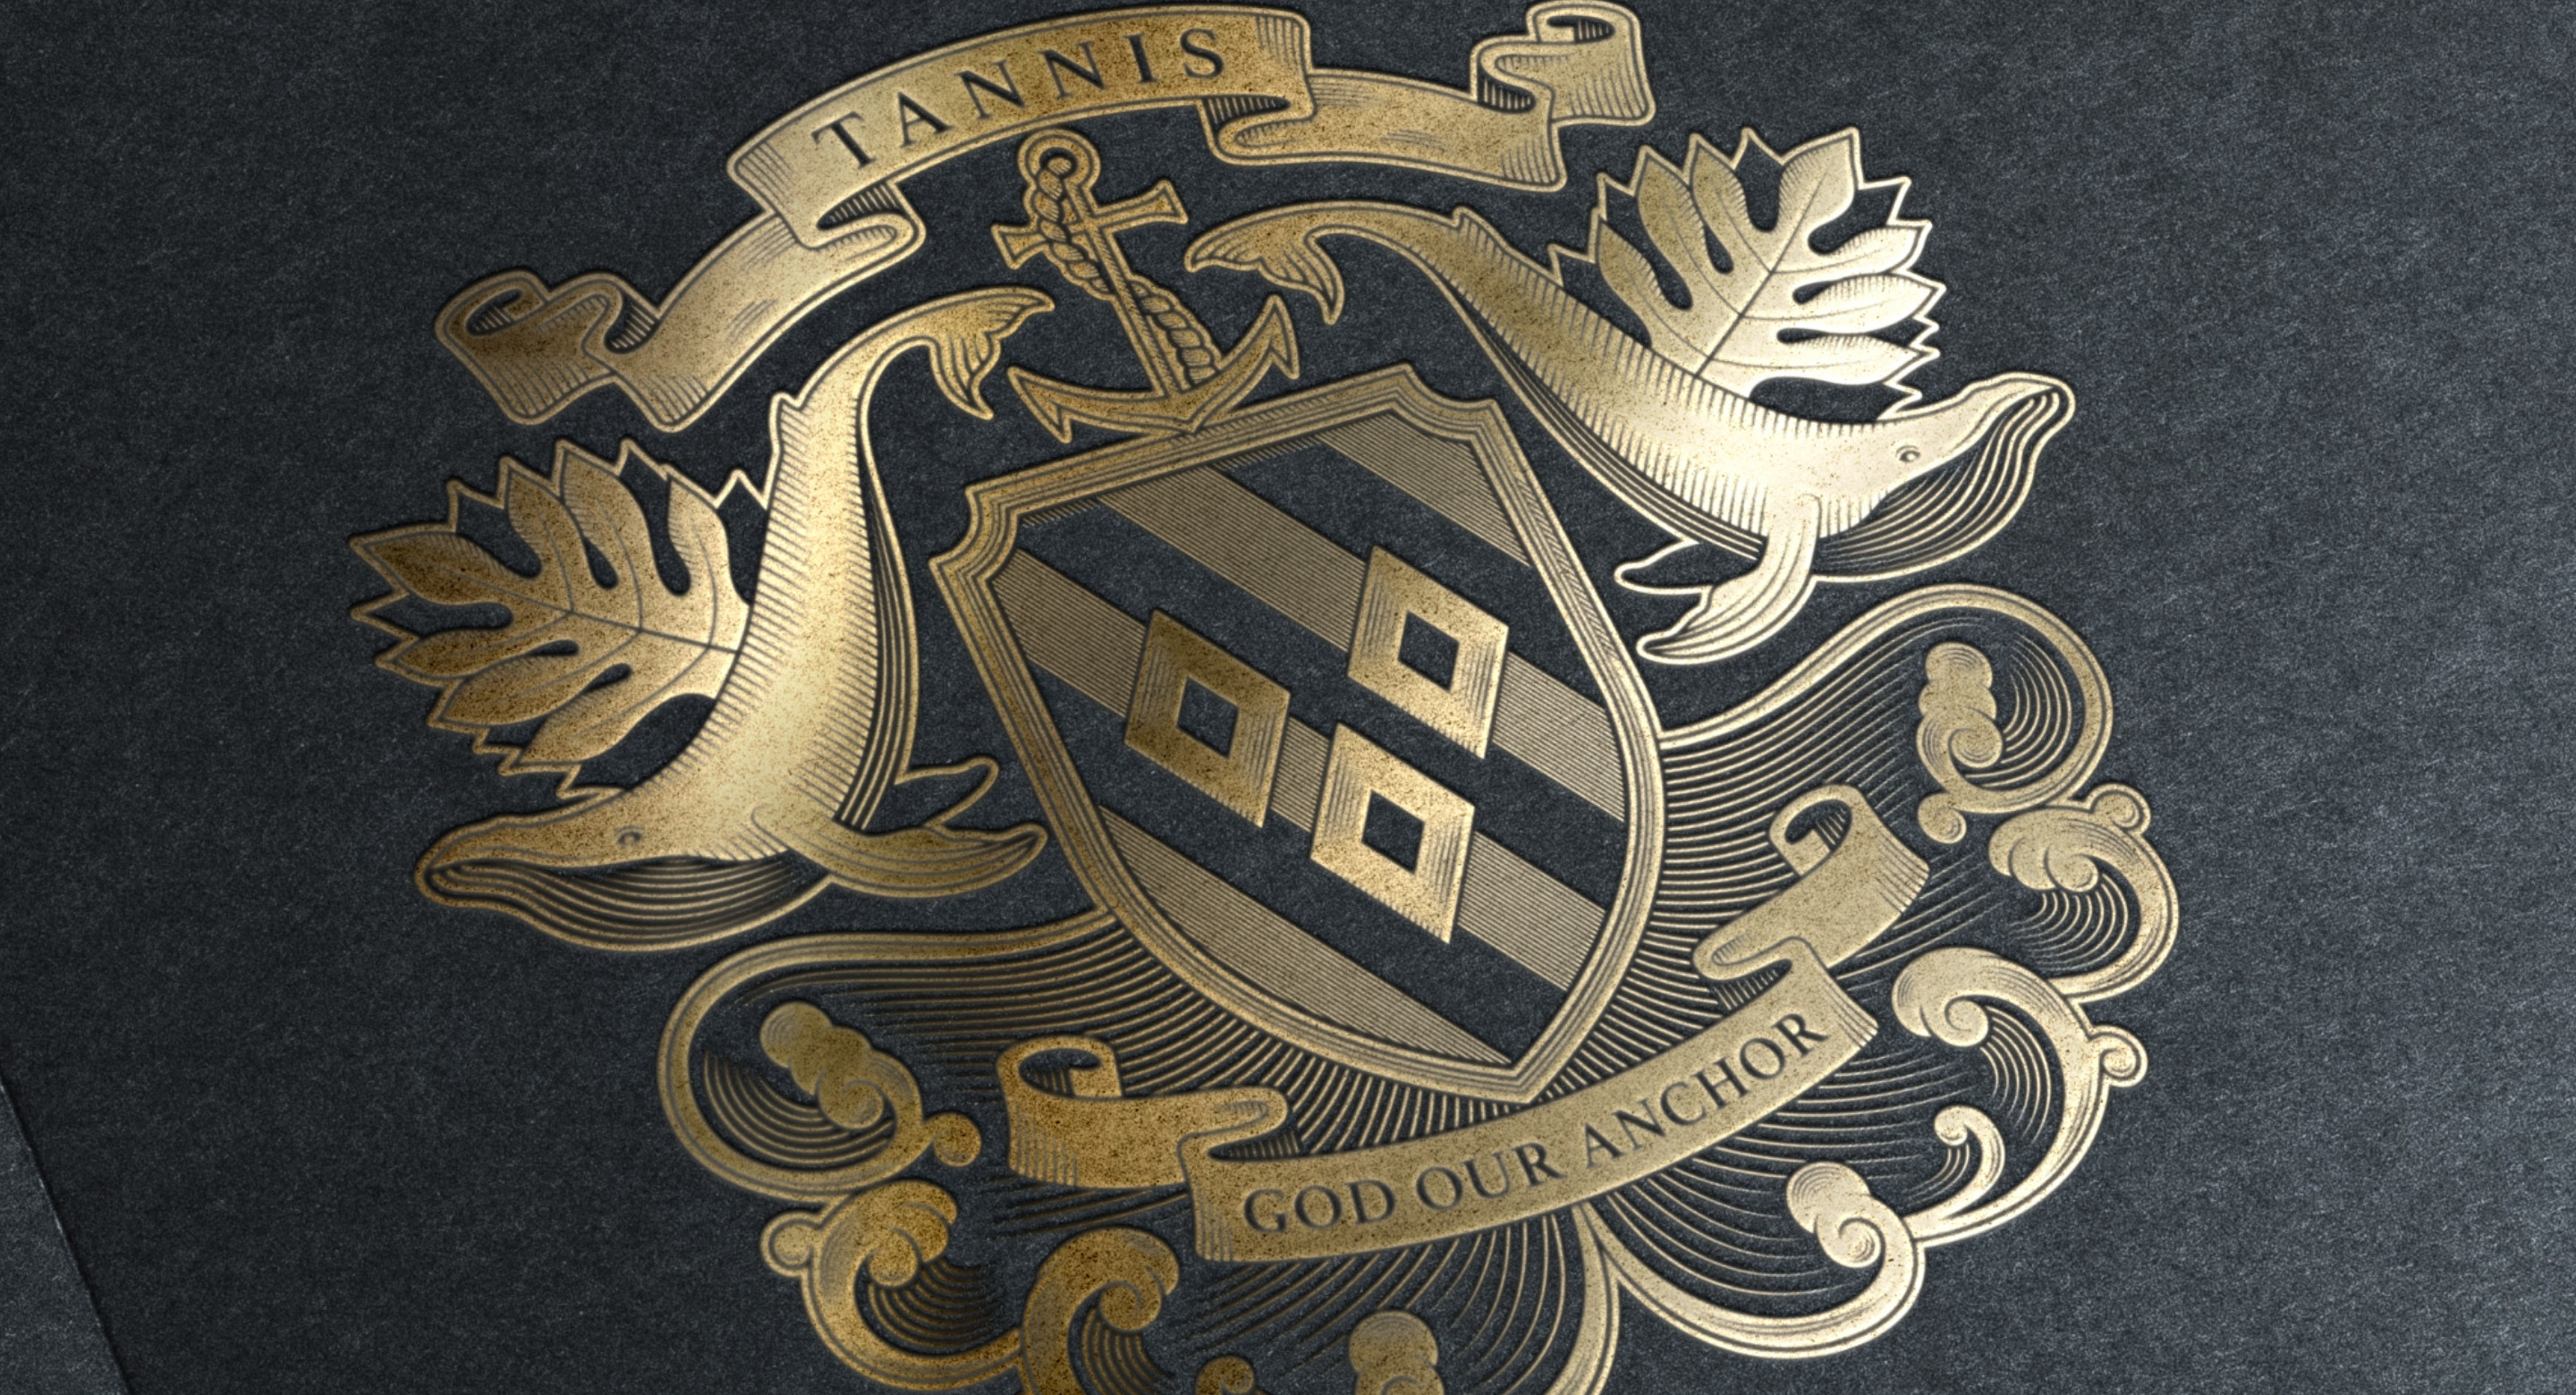 Tannis family crest shield whale design by Root Studio